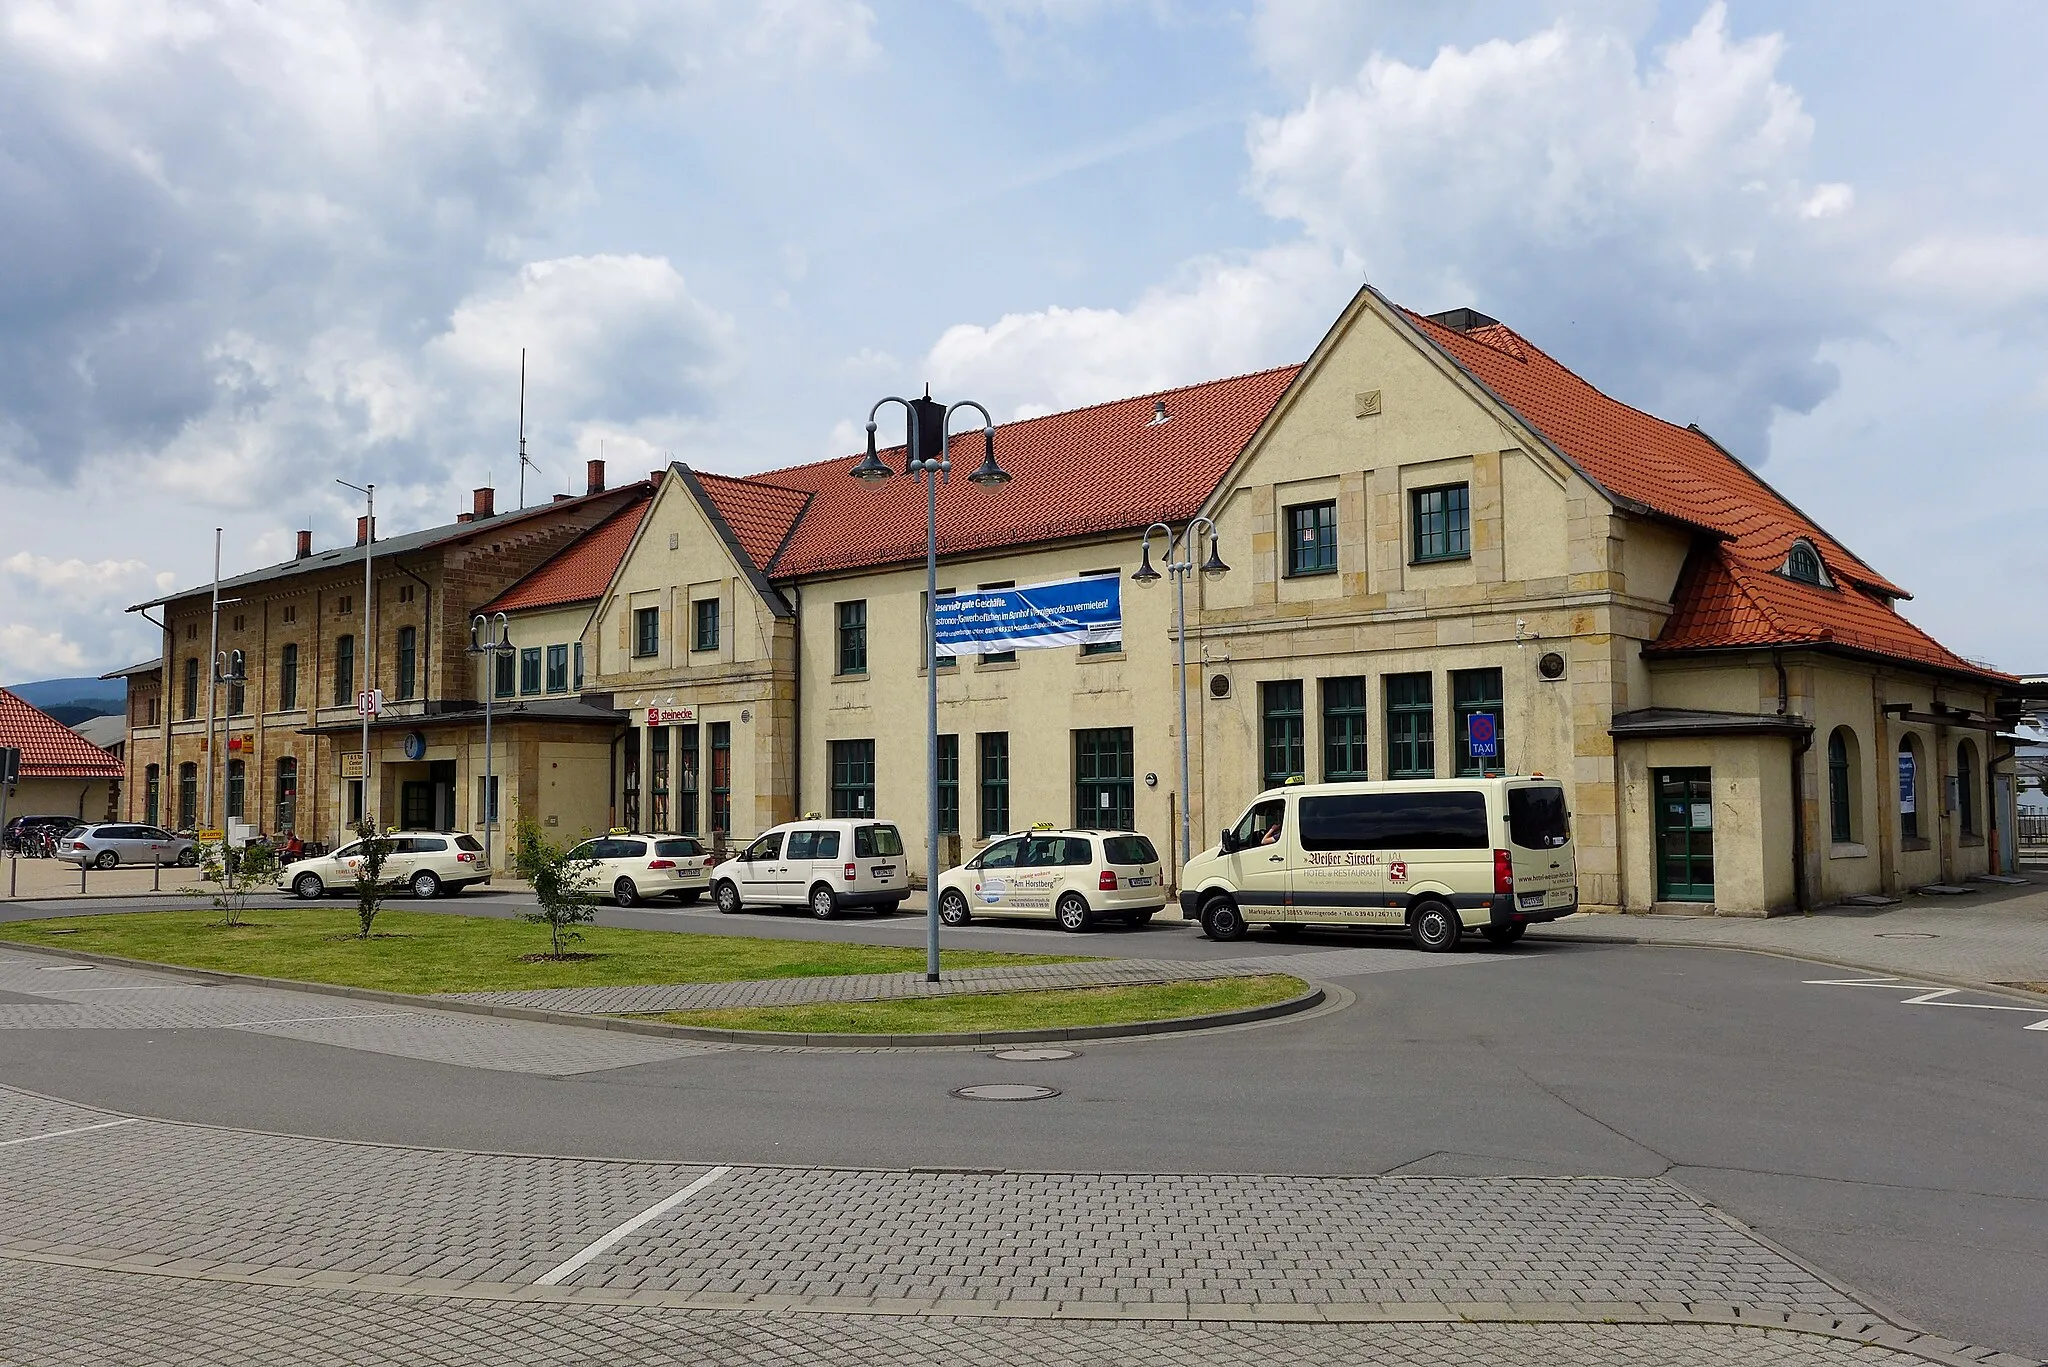 Photo showing: View of the main station building at Wernigerode railway station, Wernigerode, Germany.